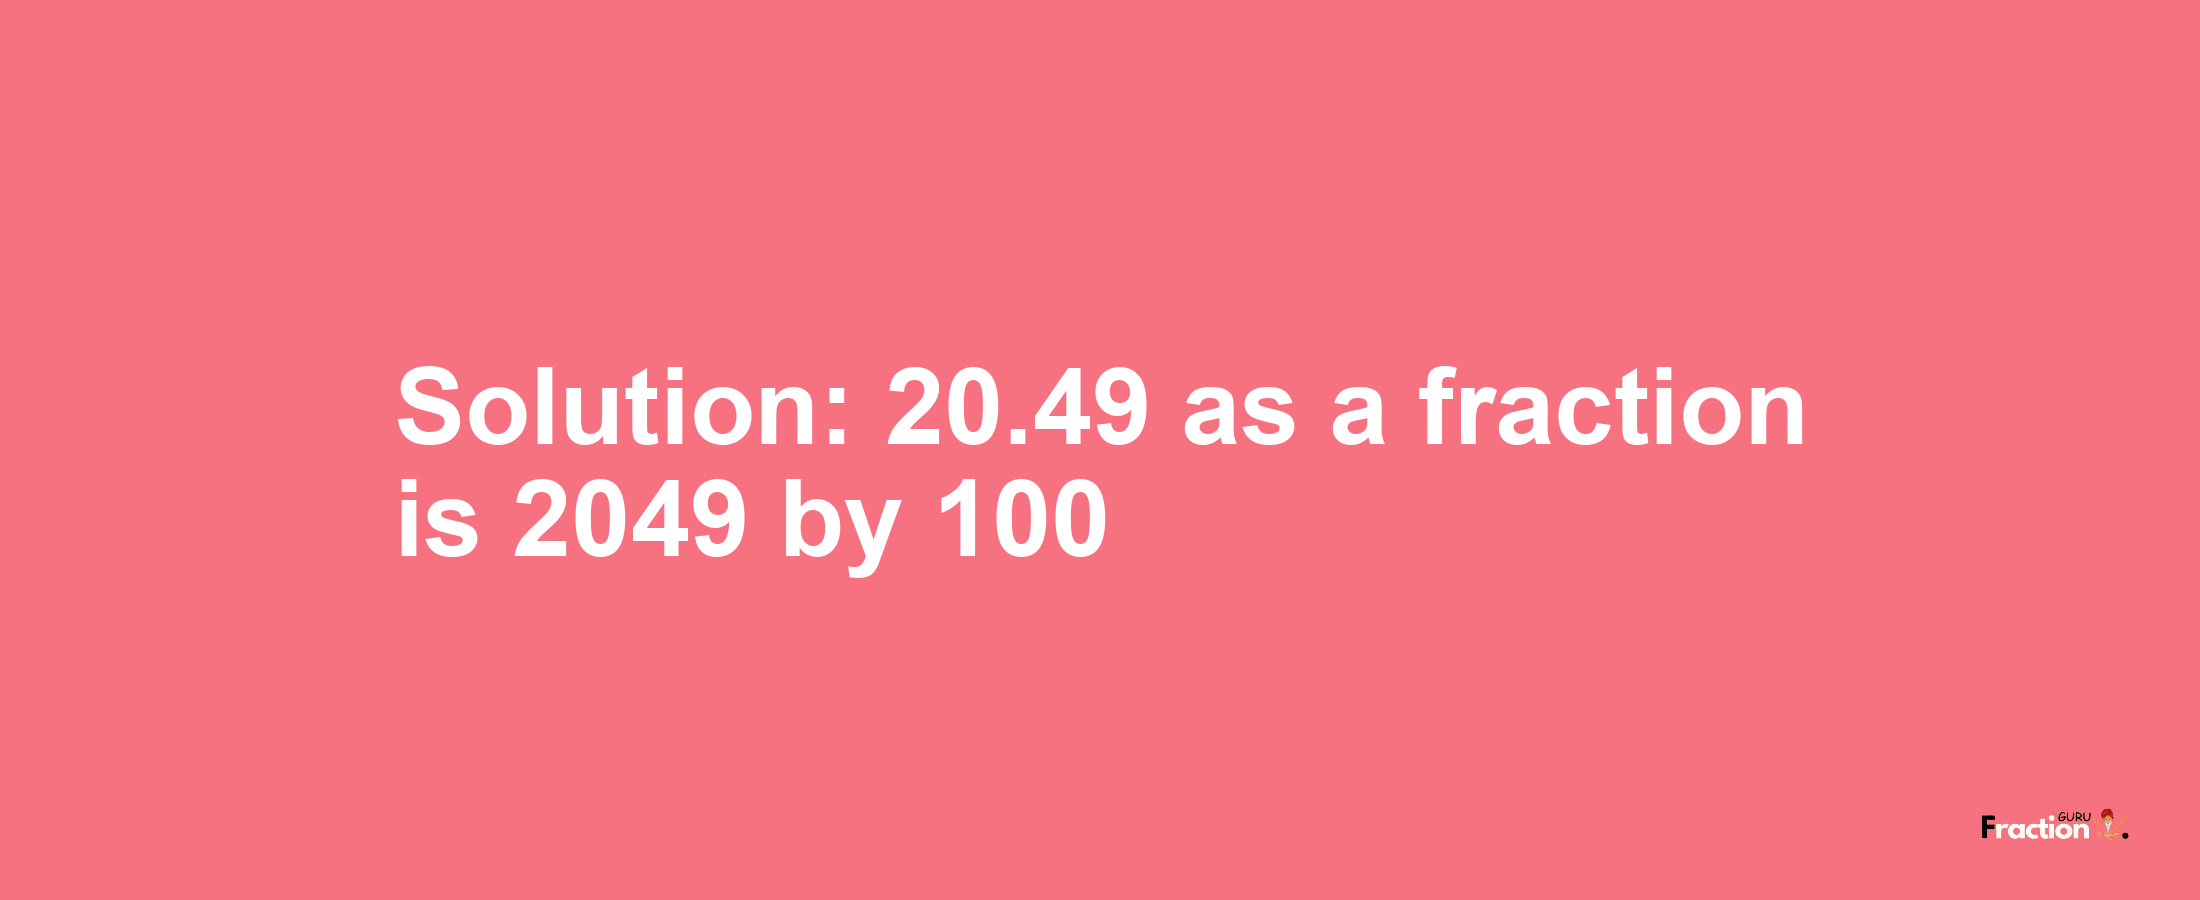 Solution:20.49 as a fraction is 2049/100